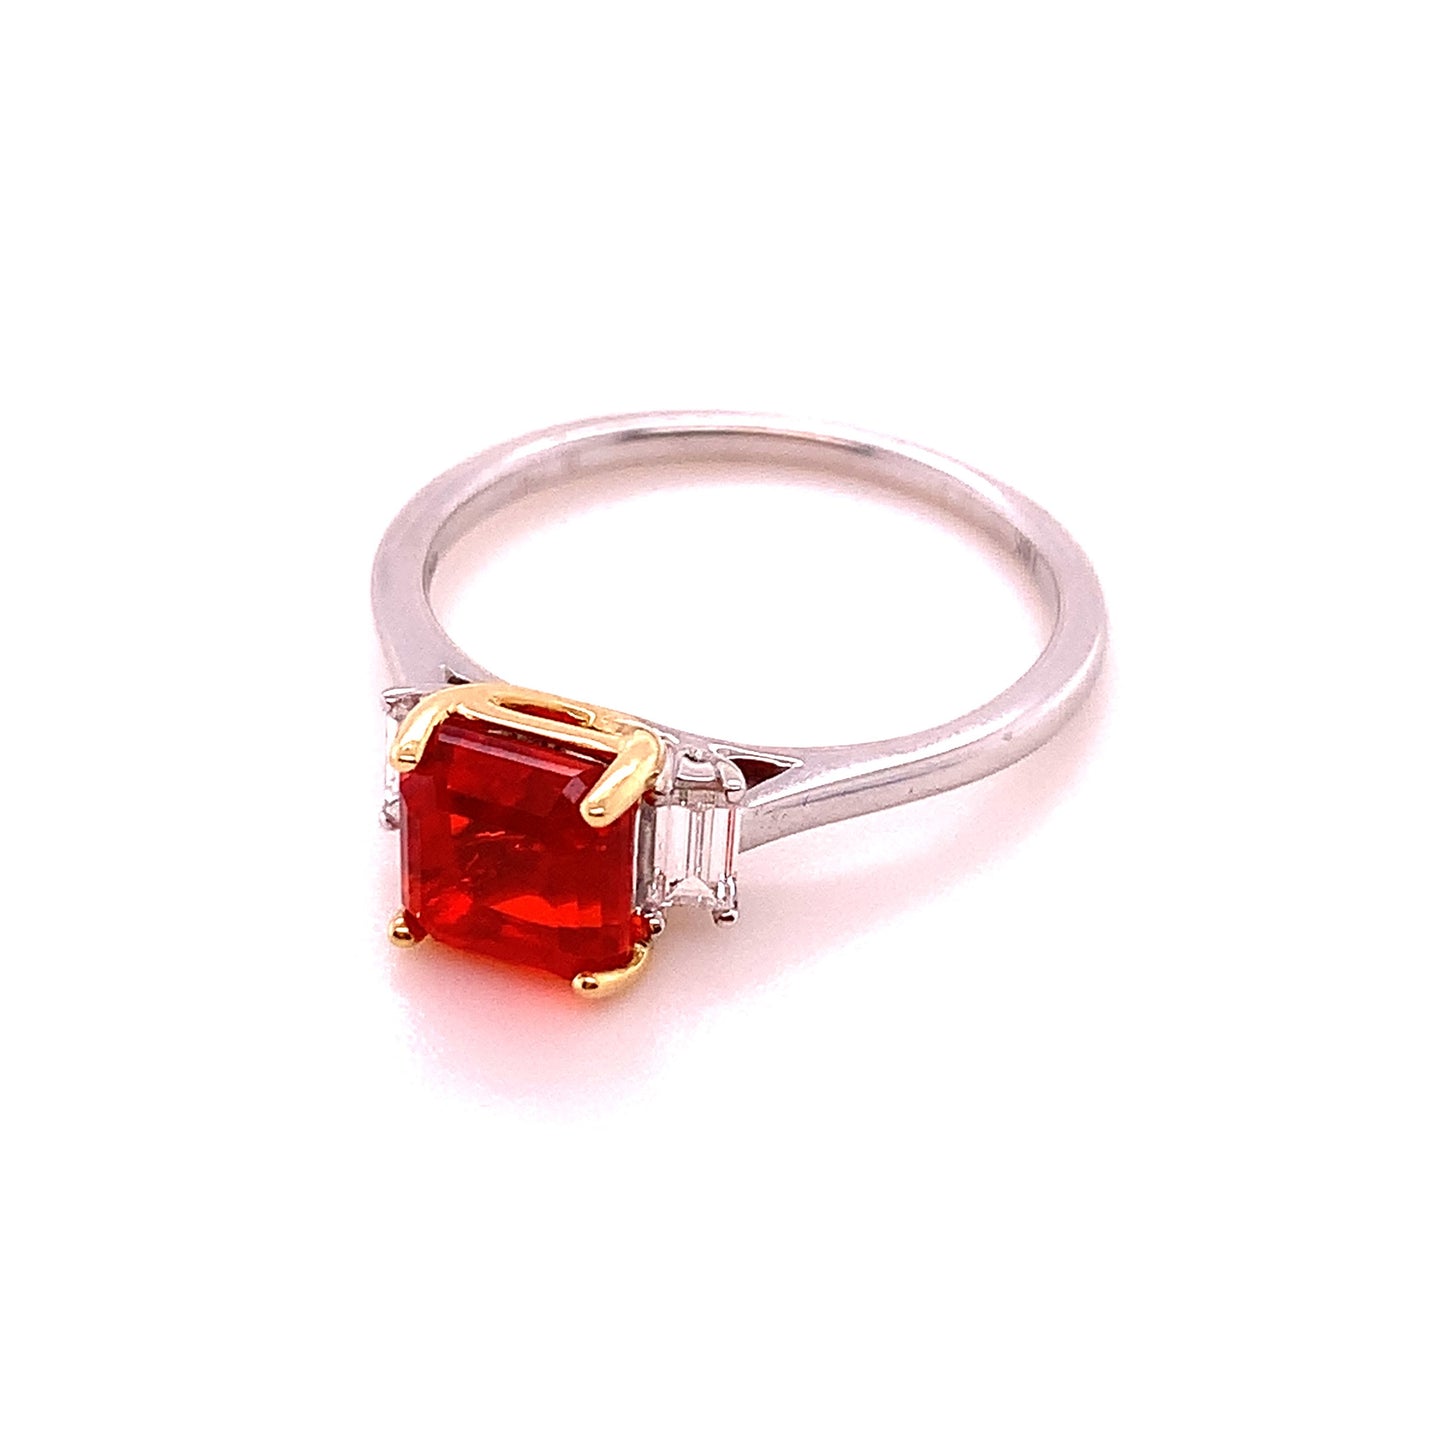 18K White and Yellow Gold Fire Opal and Diamond Ring